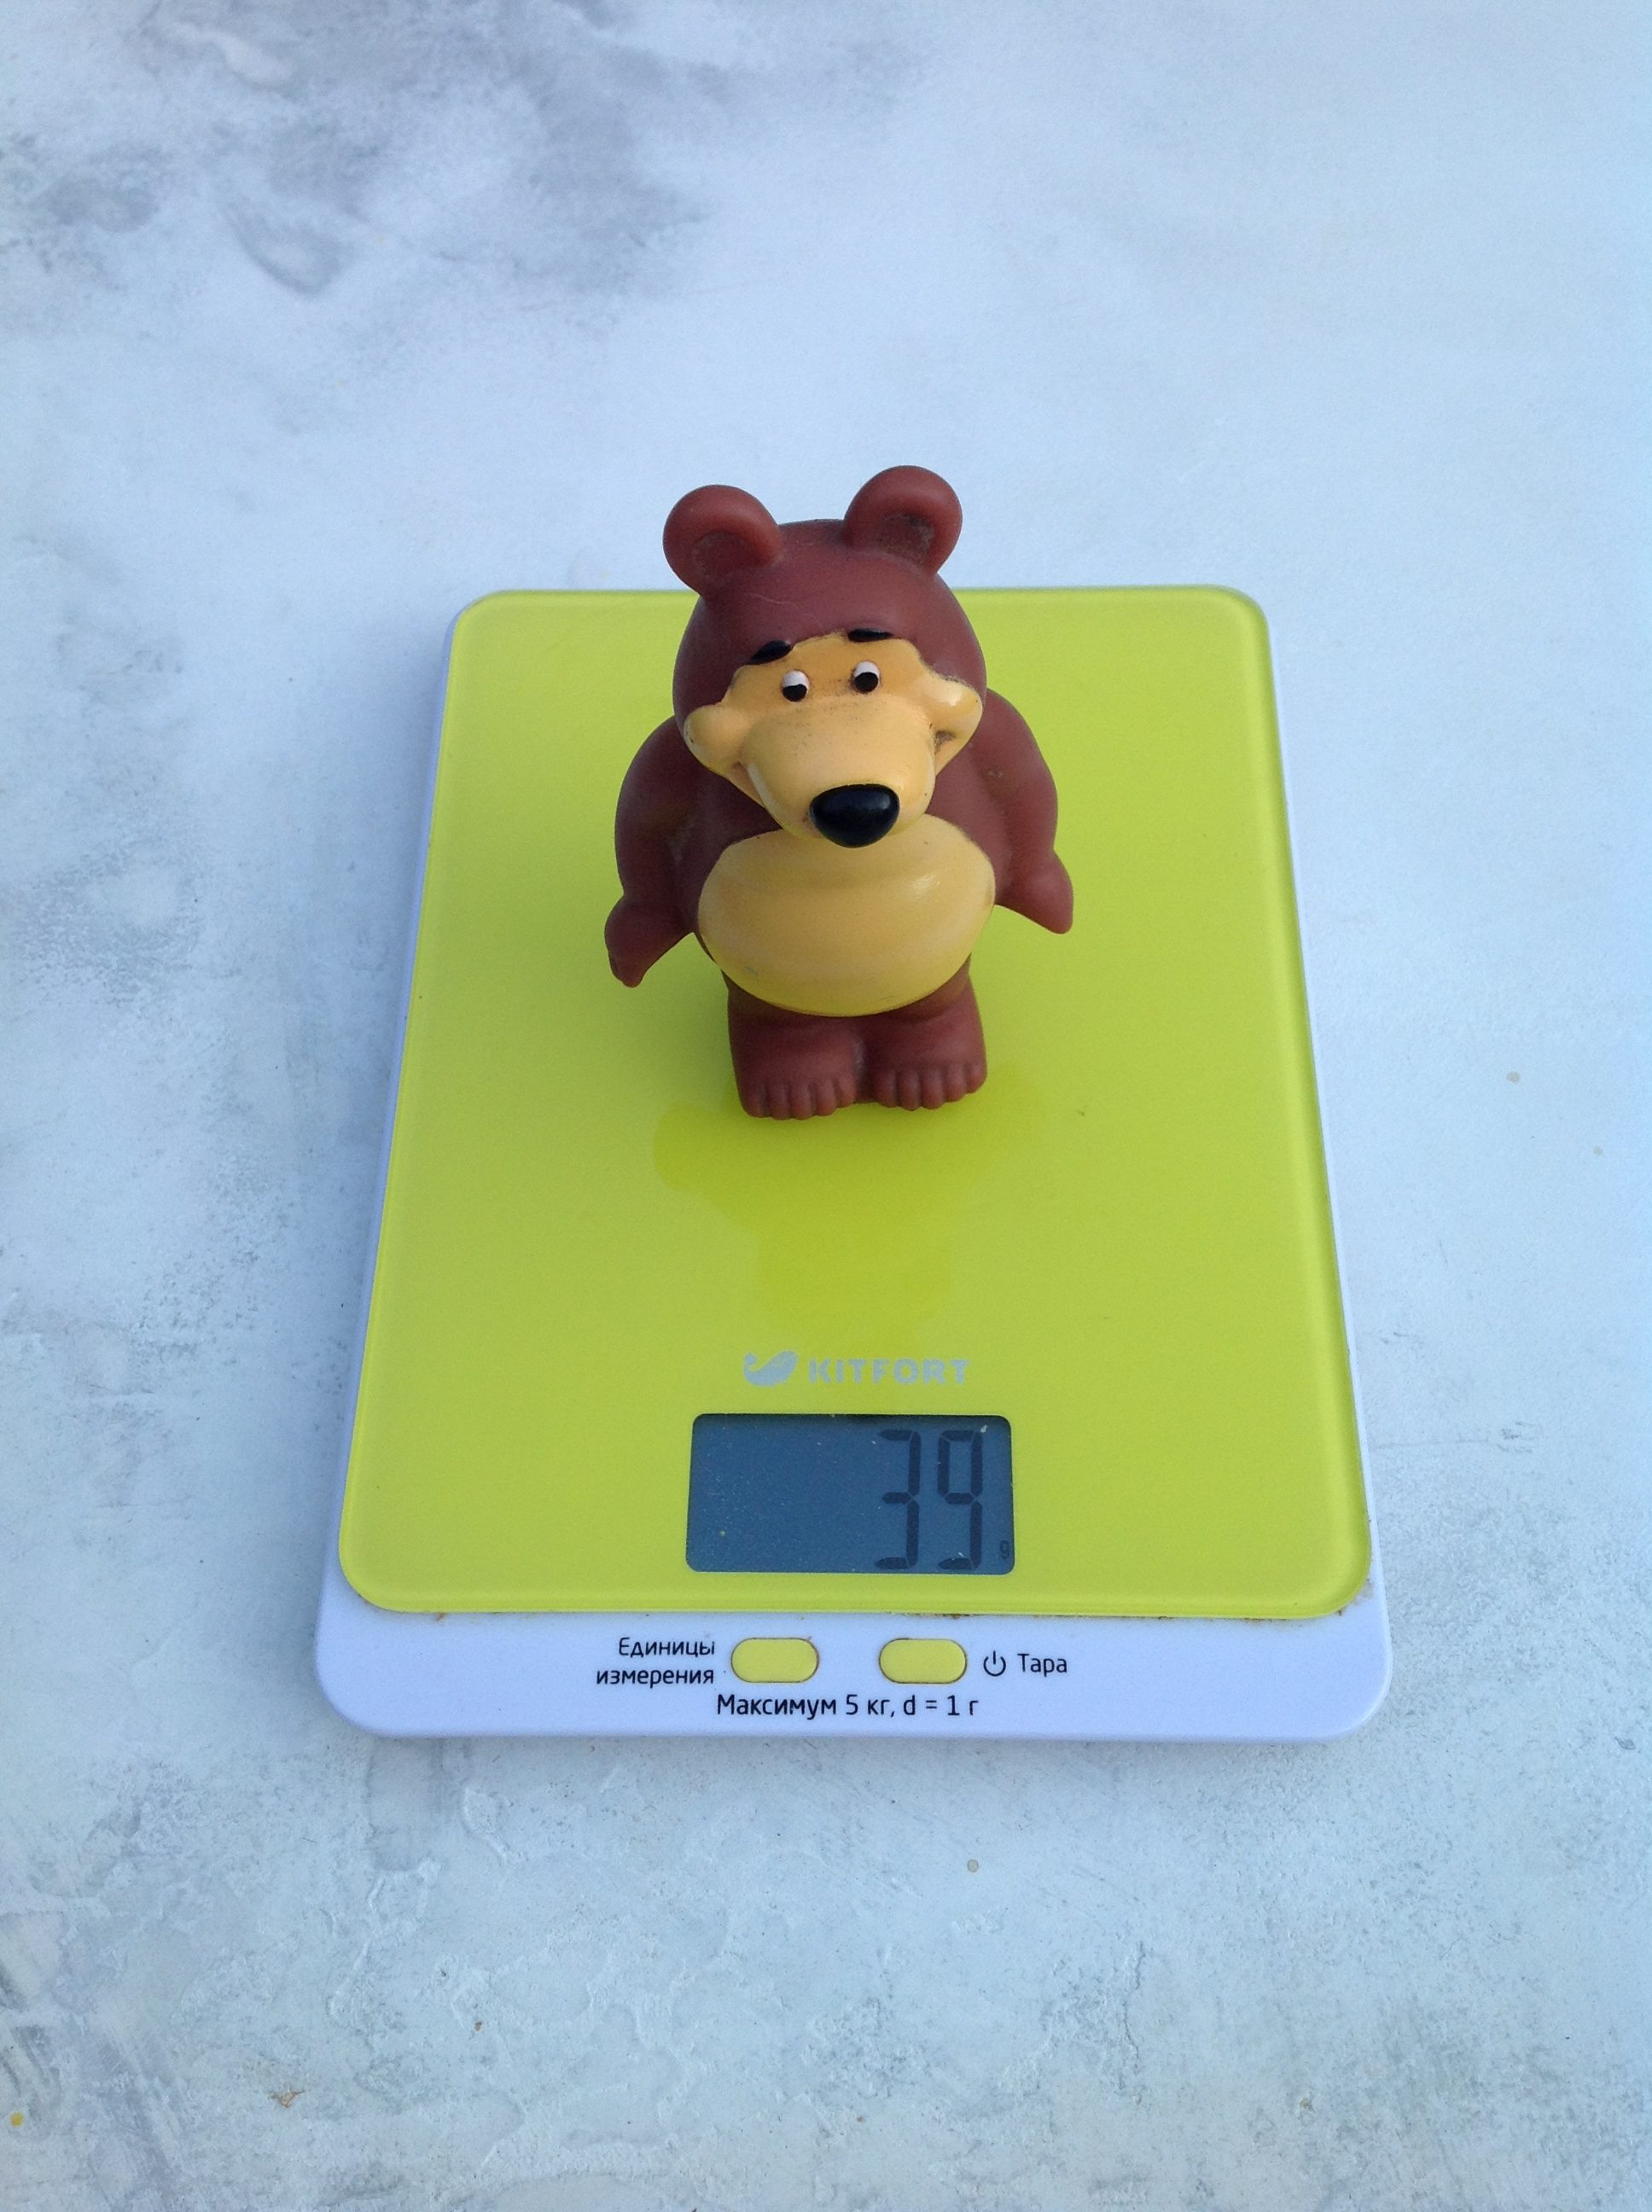 the weight of the toy rubber small bear